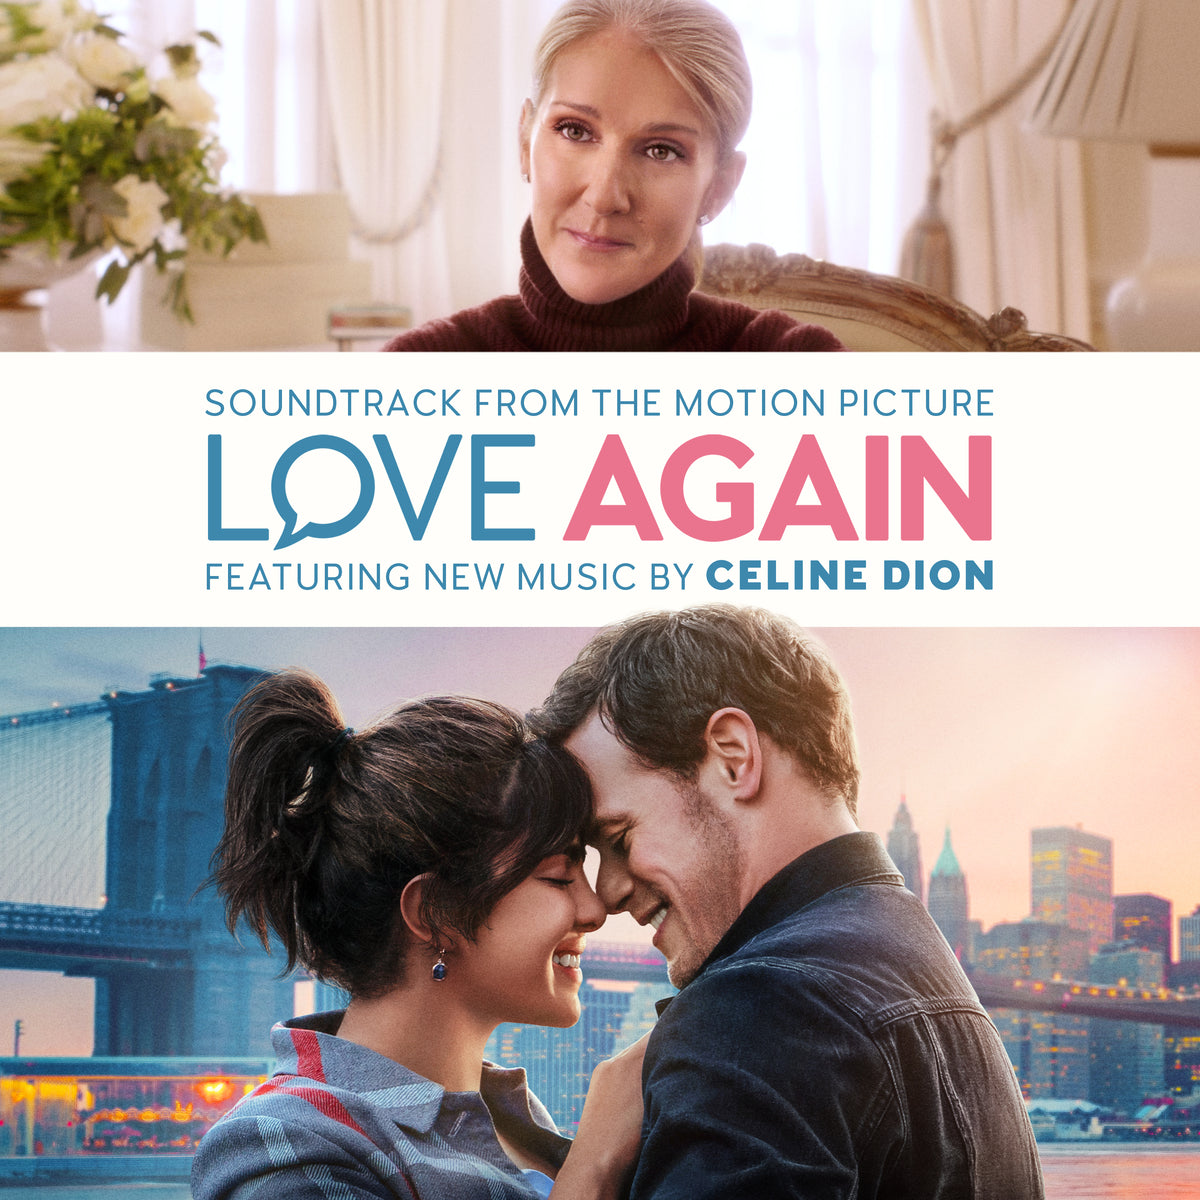 ALBUM LOVE AGAIN (Soundtrack from The Motion Picture)